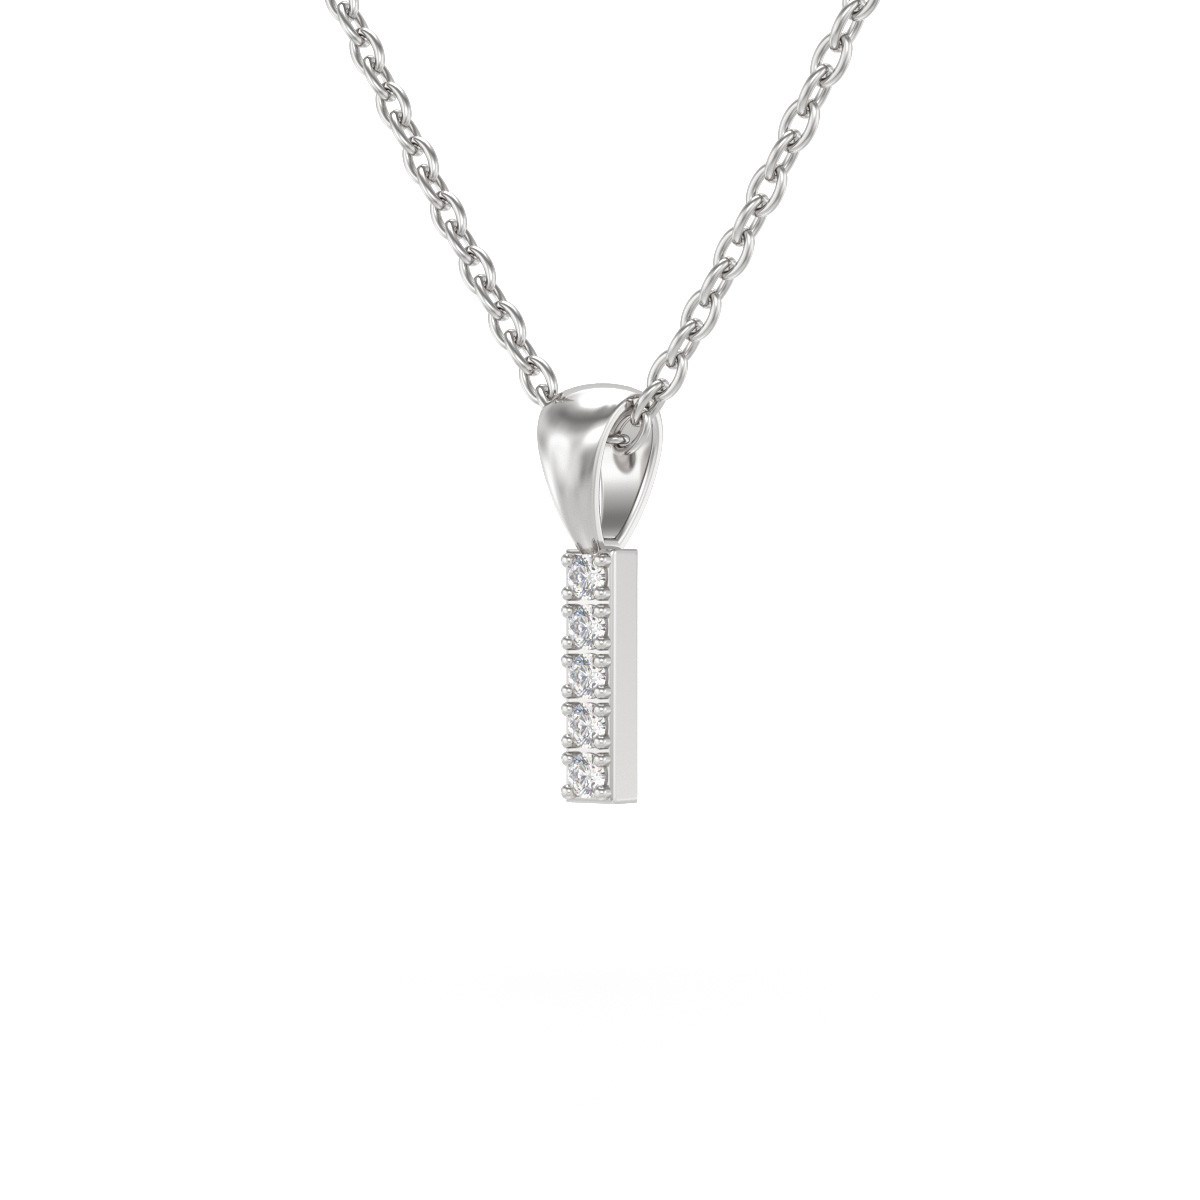 Collier Pendentif ADEN Lettre I Or 750 Blanc Diamant Chaine Or 750 incluse 0.72grs - vue 3